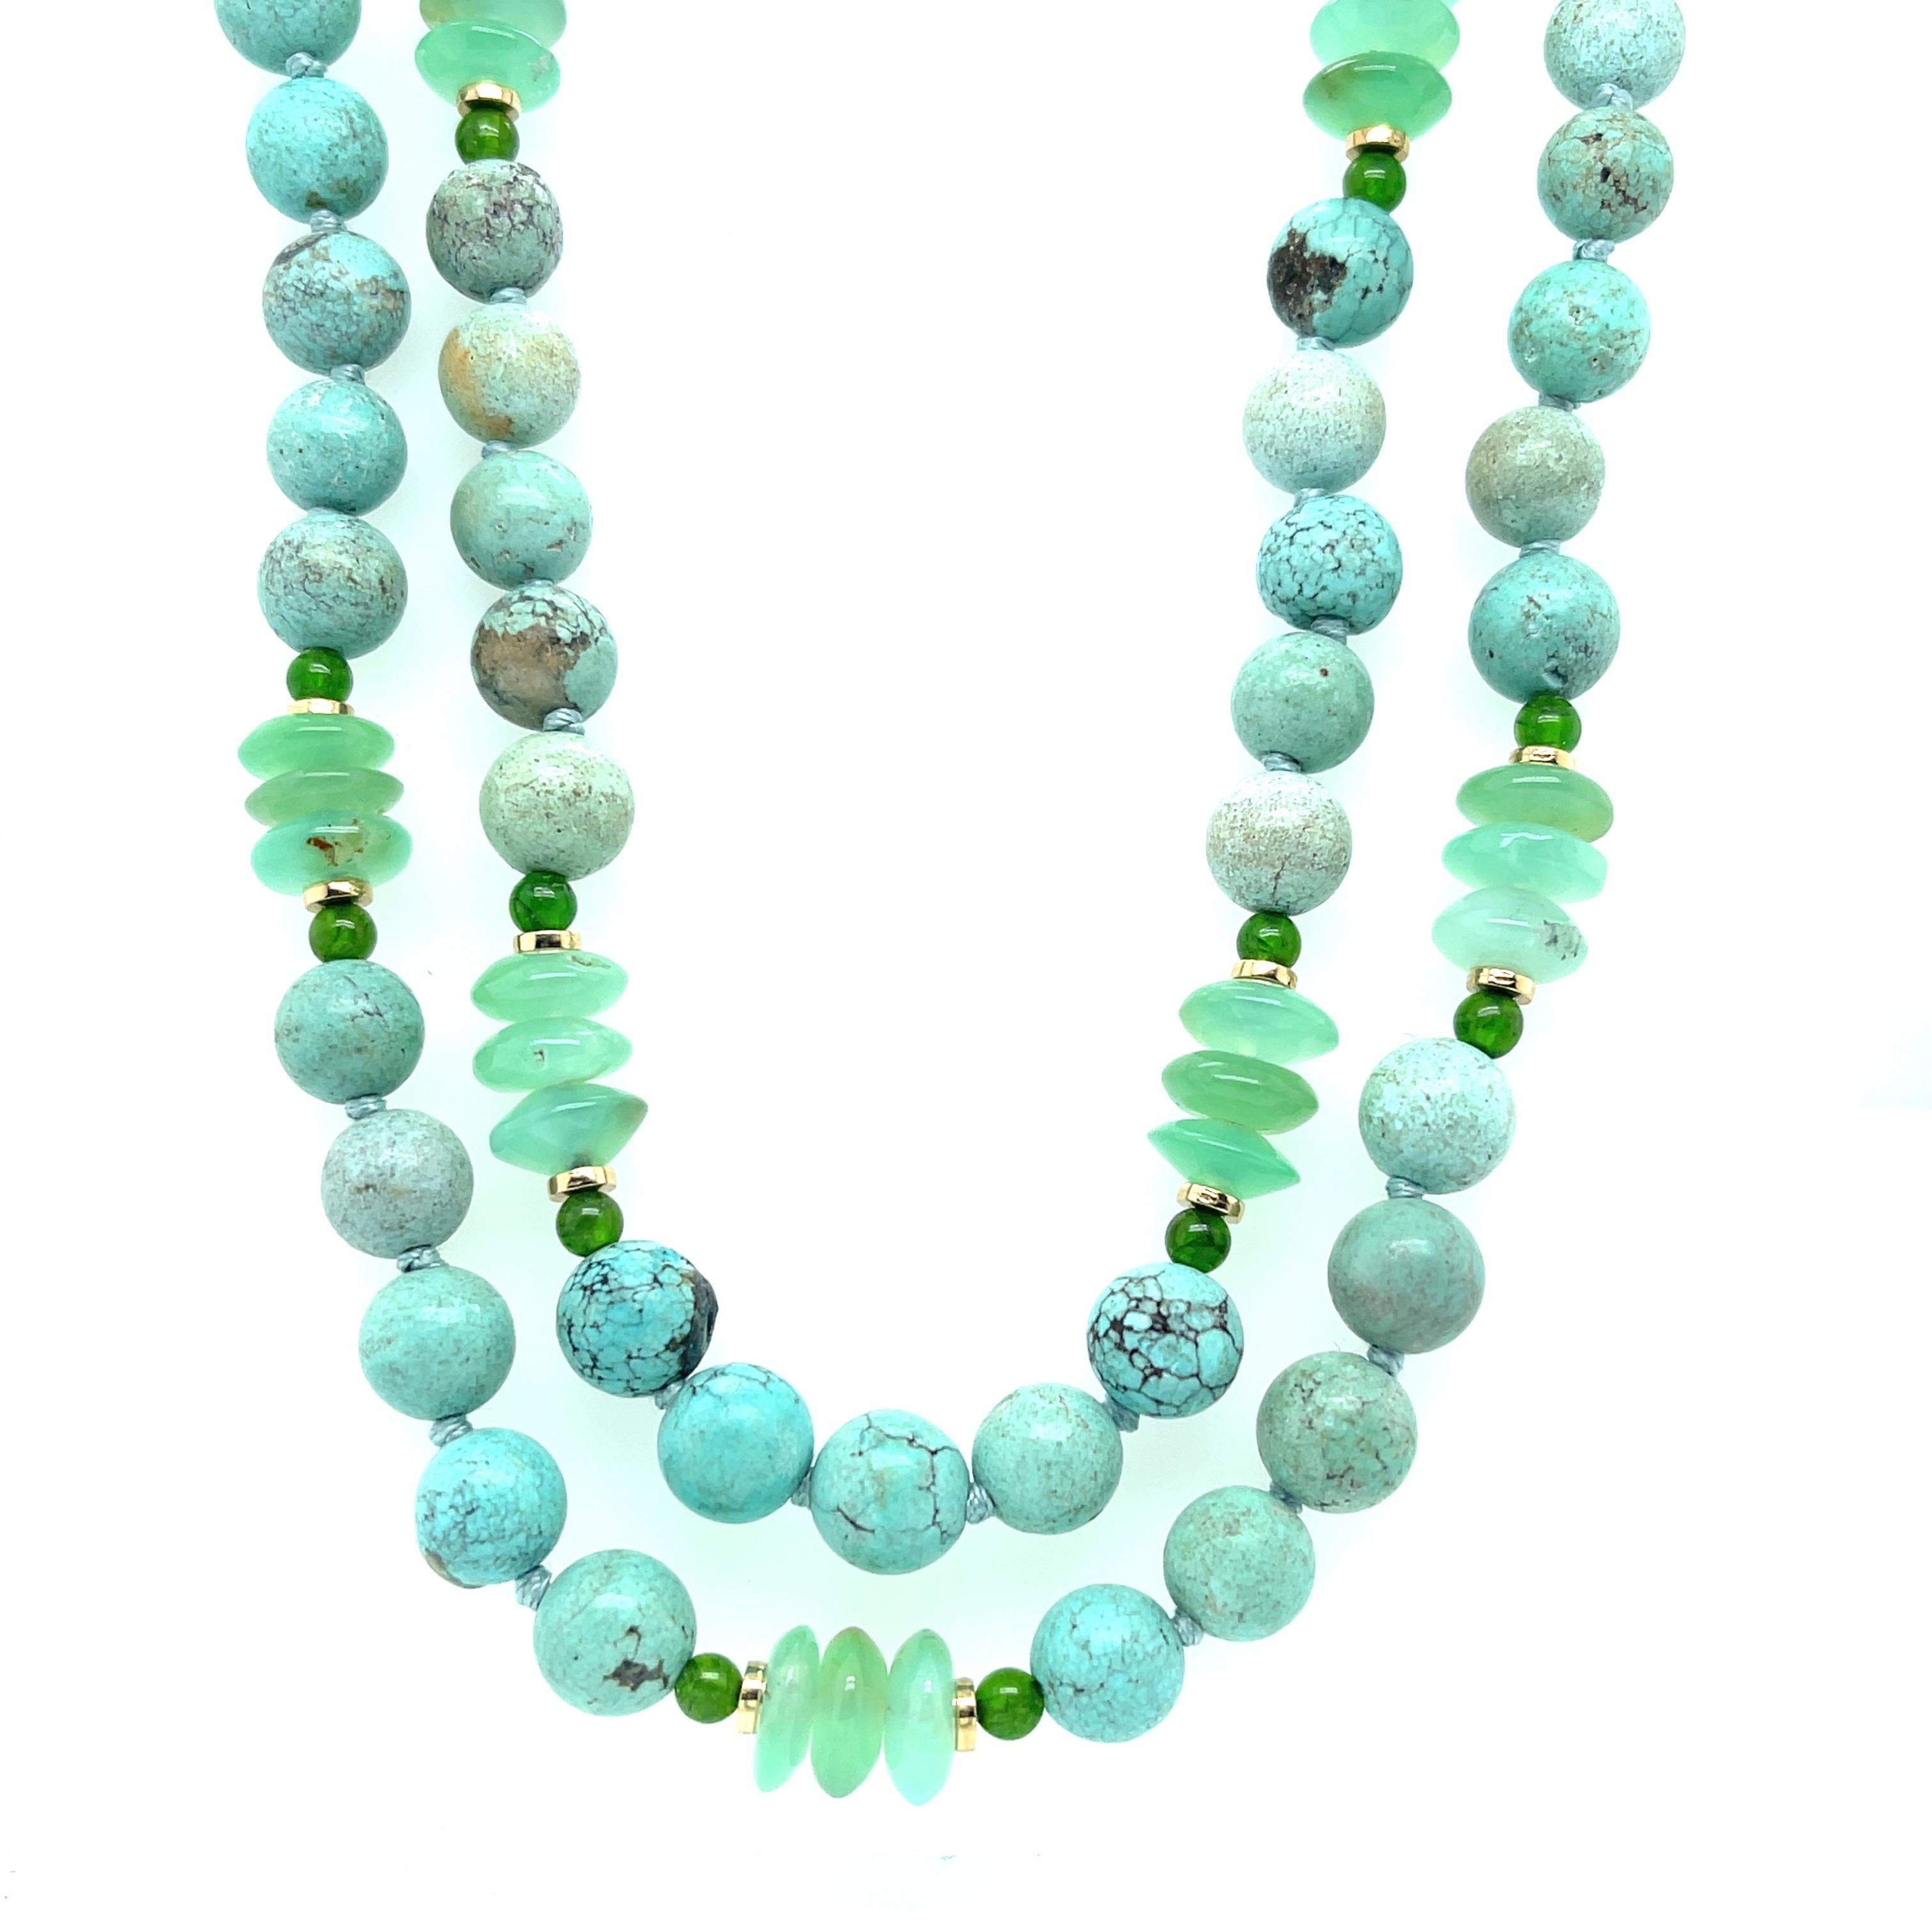 Beautiful greenish blue turquoise is paired with bright chrome diopside and elegant chrysoprase in this pretty necklace that is perfect for all seasons! The 8mm round turquoise has lovely color and subtle veining that gives each bead its own